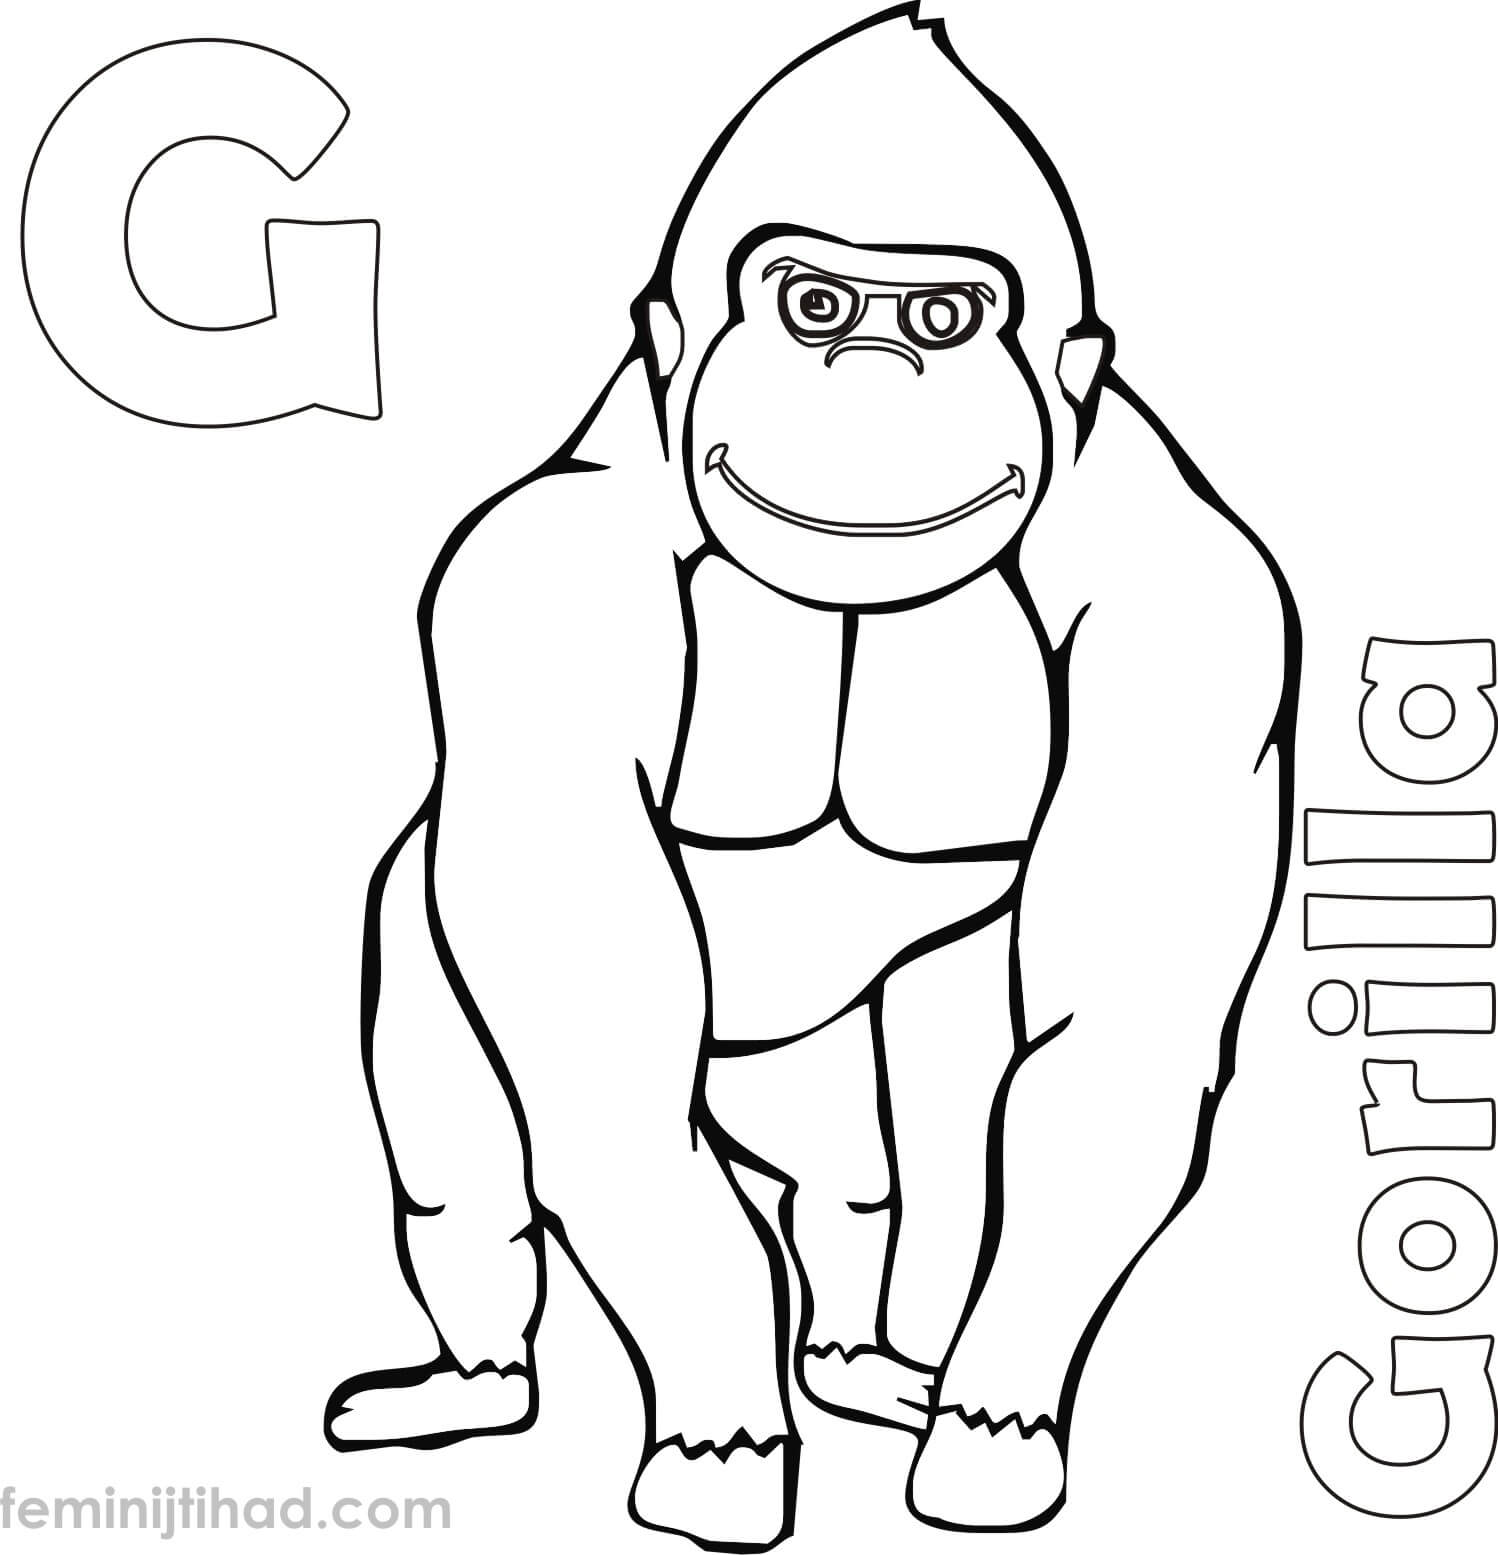 Gorilla Coloring Pages For Kids At GetDrawings Free Download